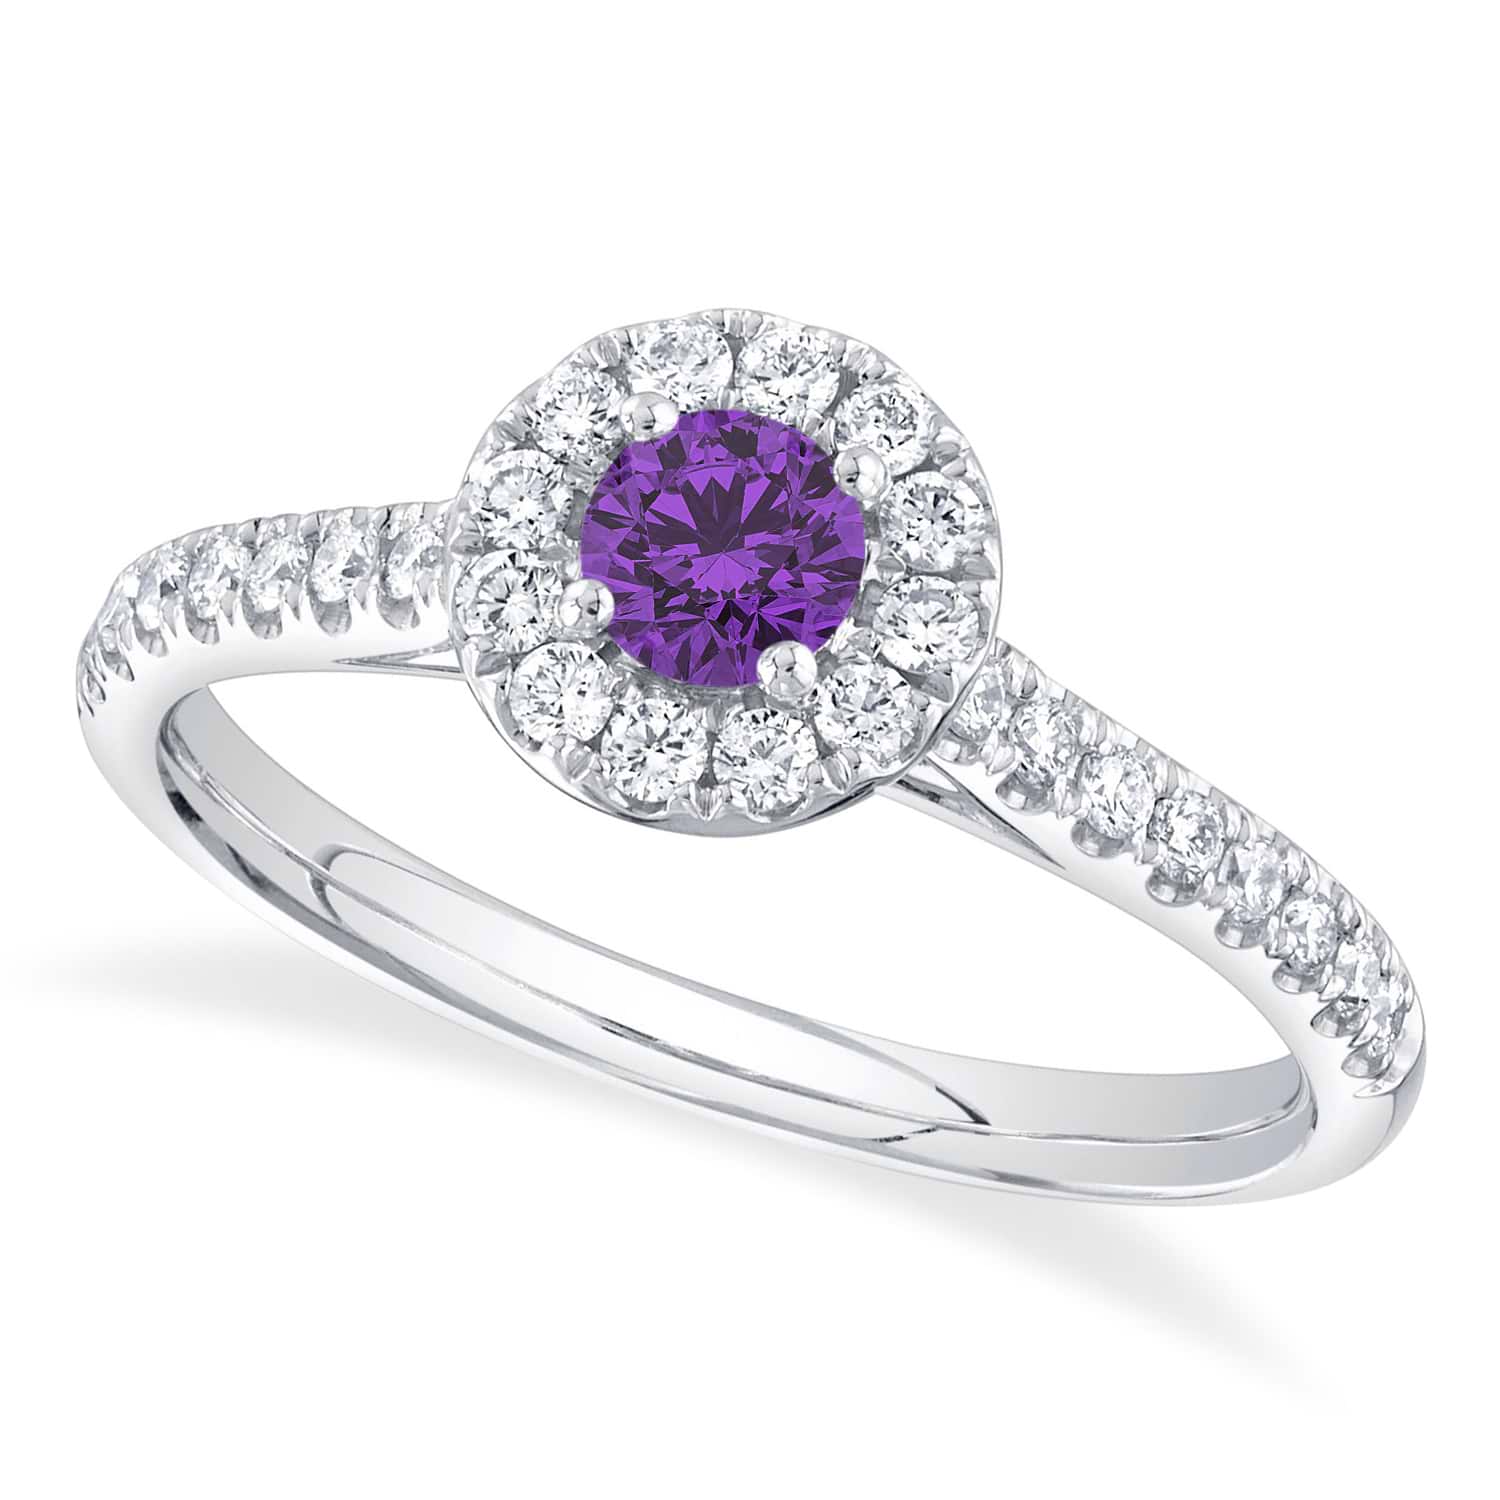 Round Amethyst Solitaire & Diamond Engagement Ring 14K White Gold (0.56ct)